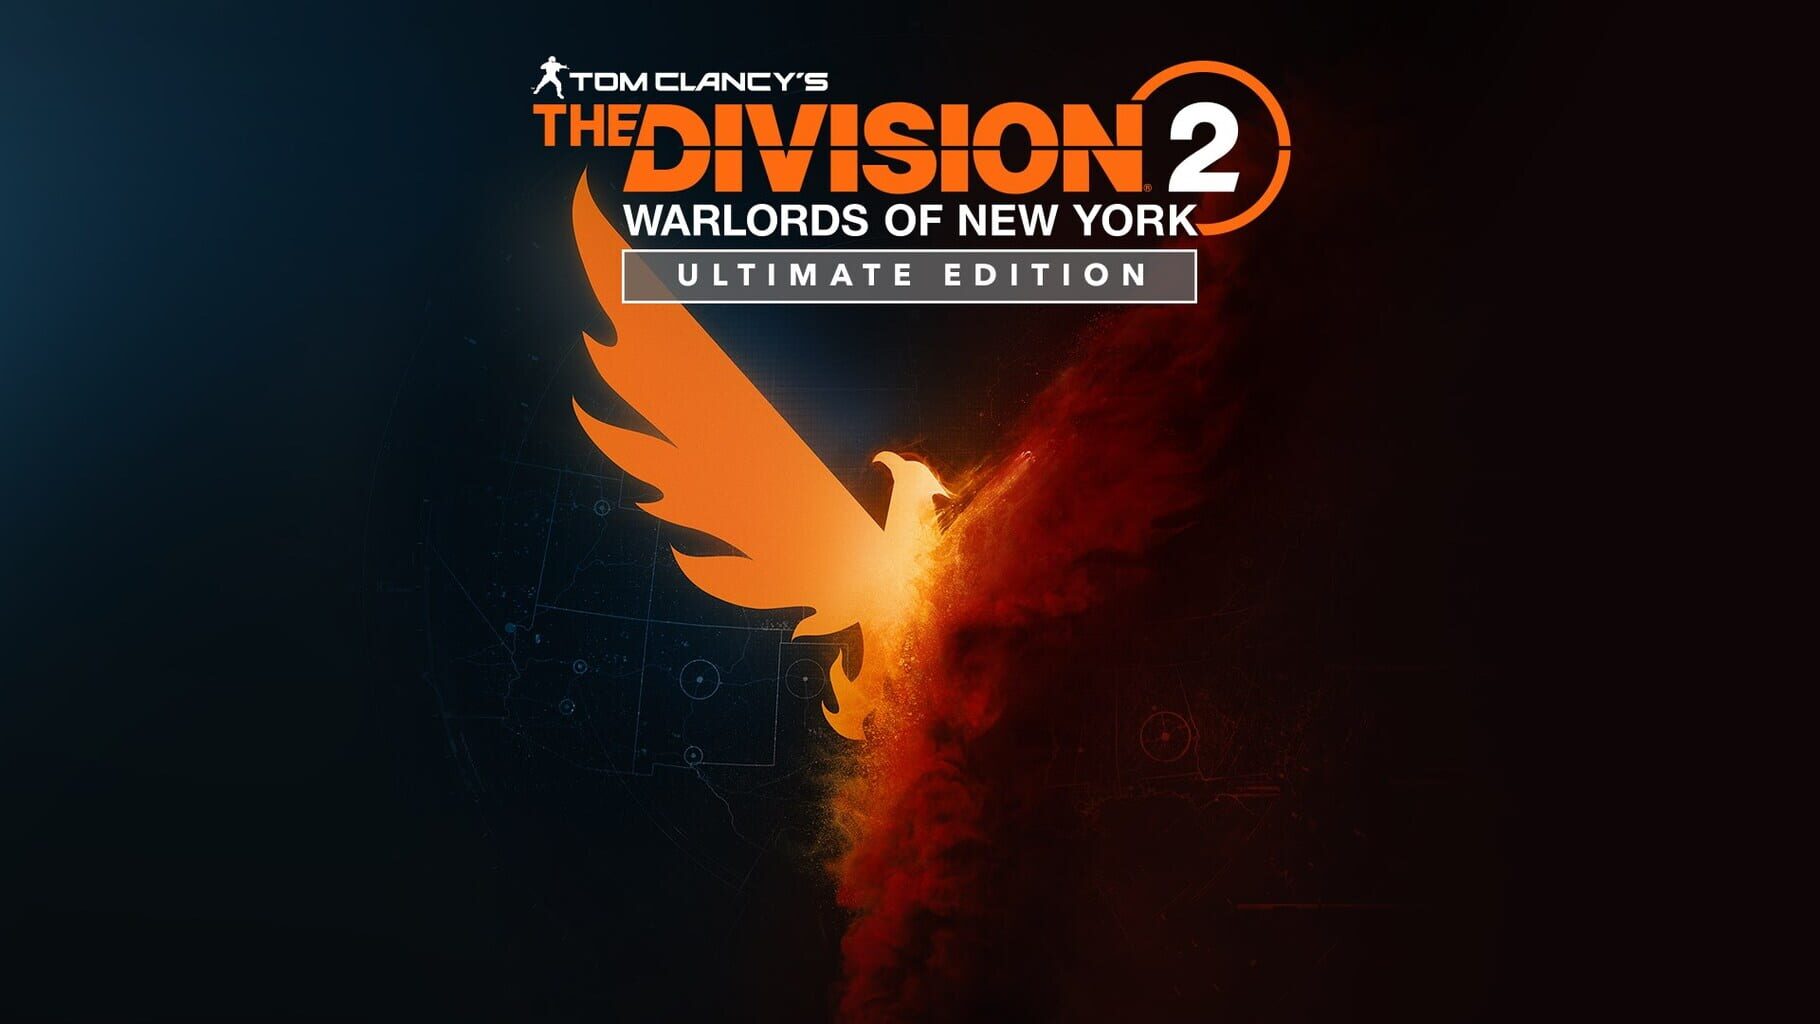 Tom Clancy's The Division 2: Warlords of New York - Ultimate Edition Image